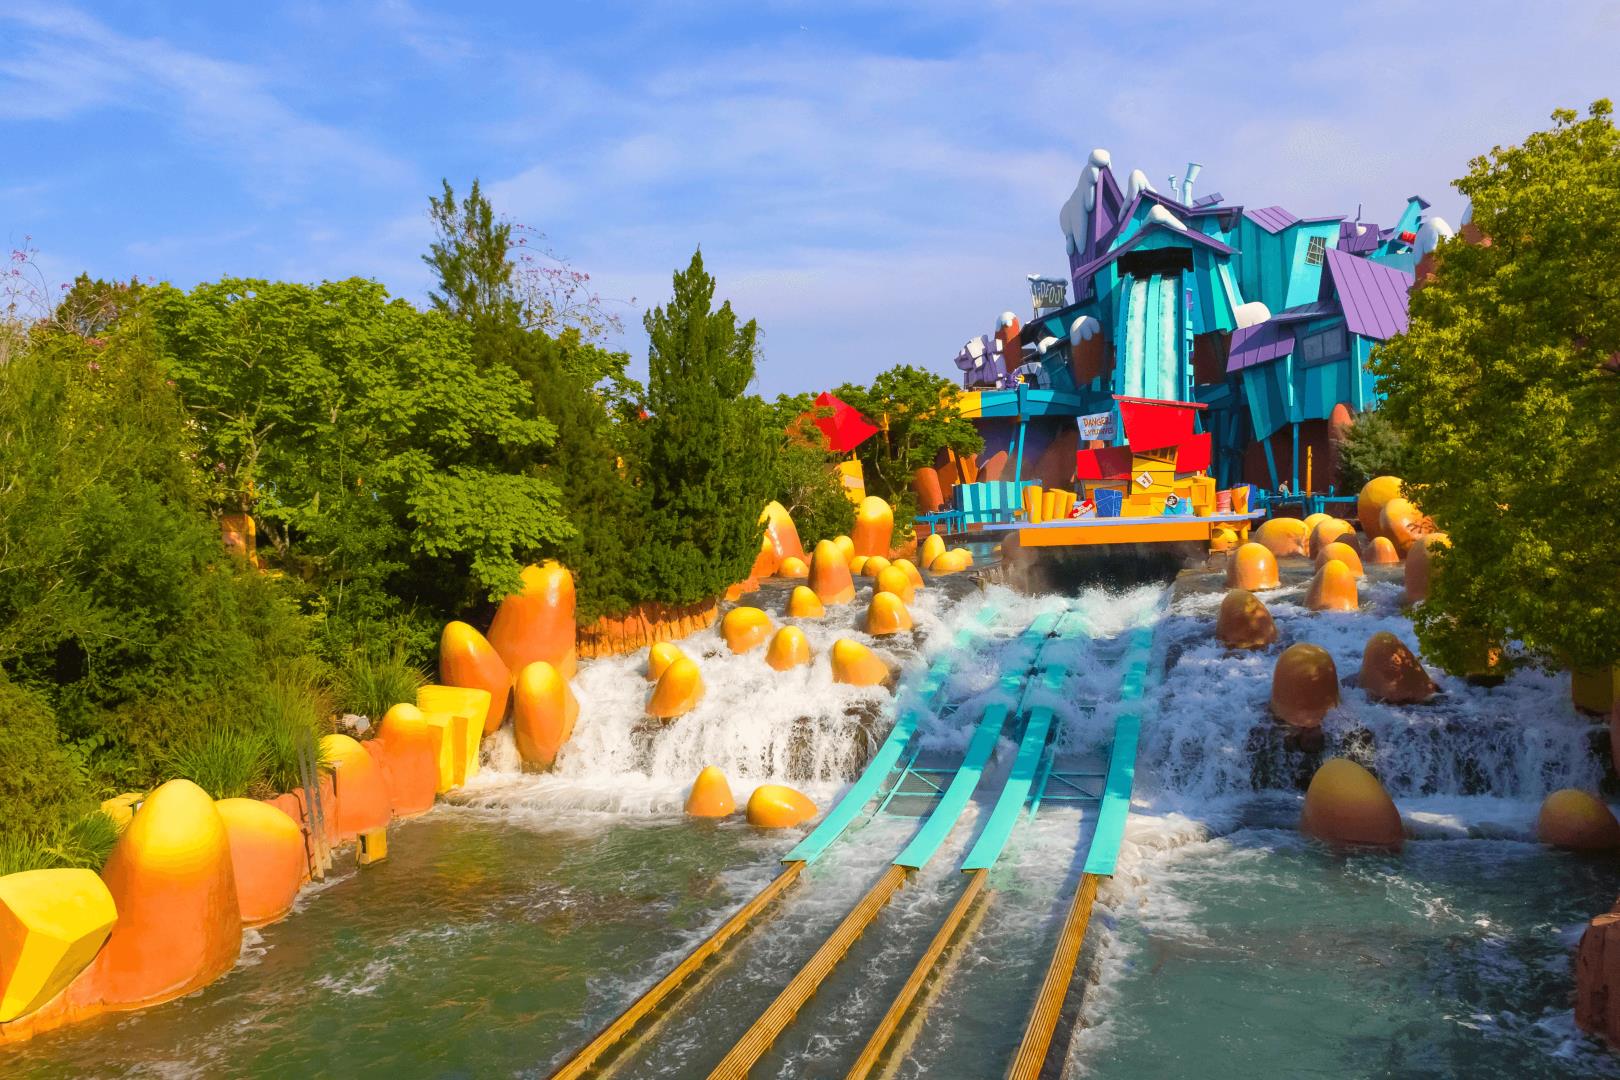 brightly colored water ride with two tracks